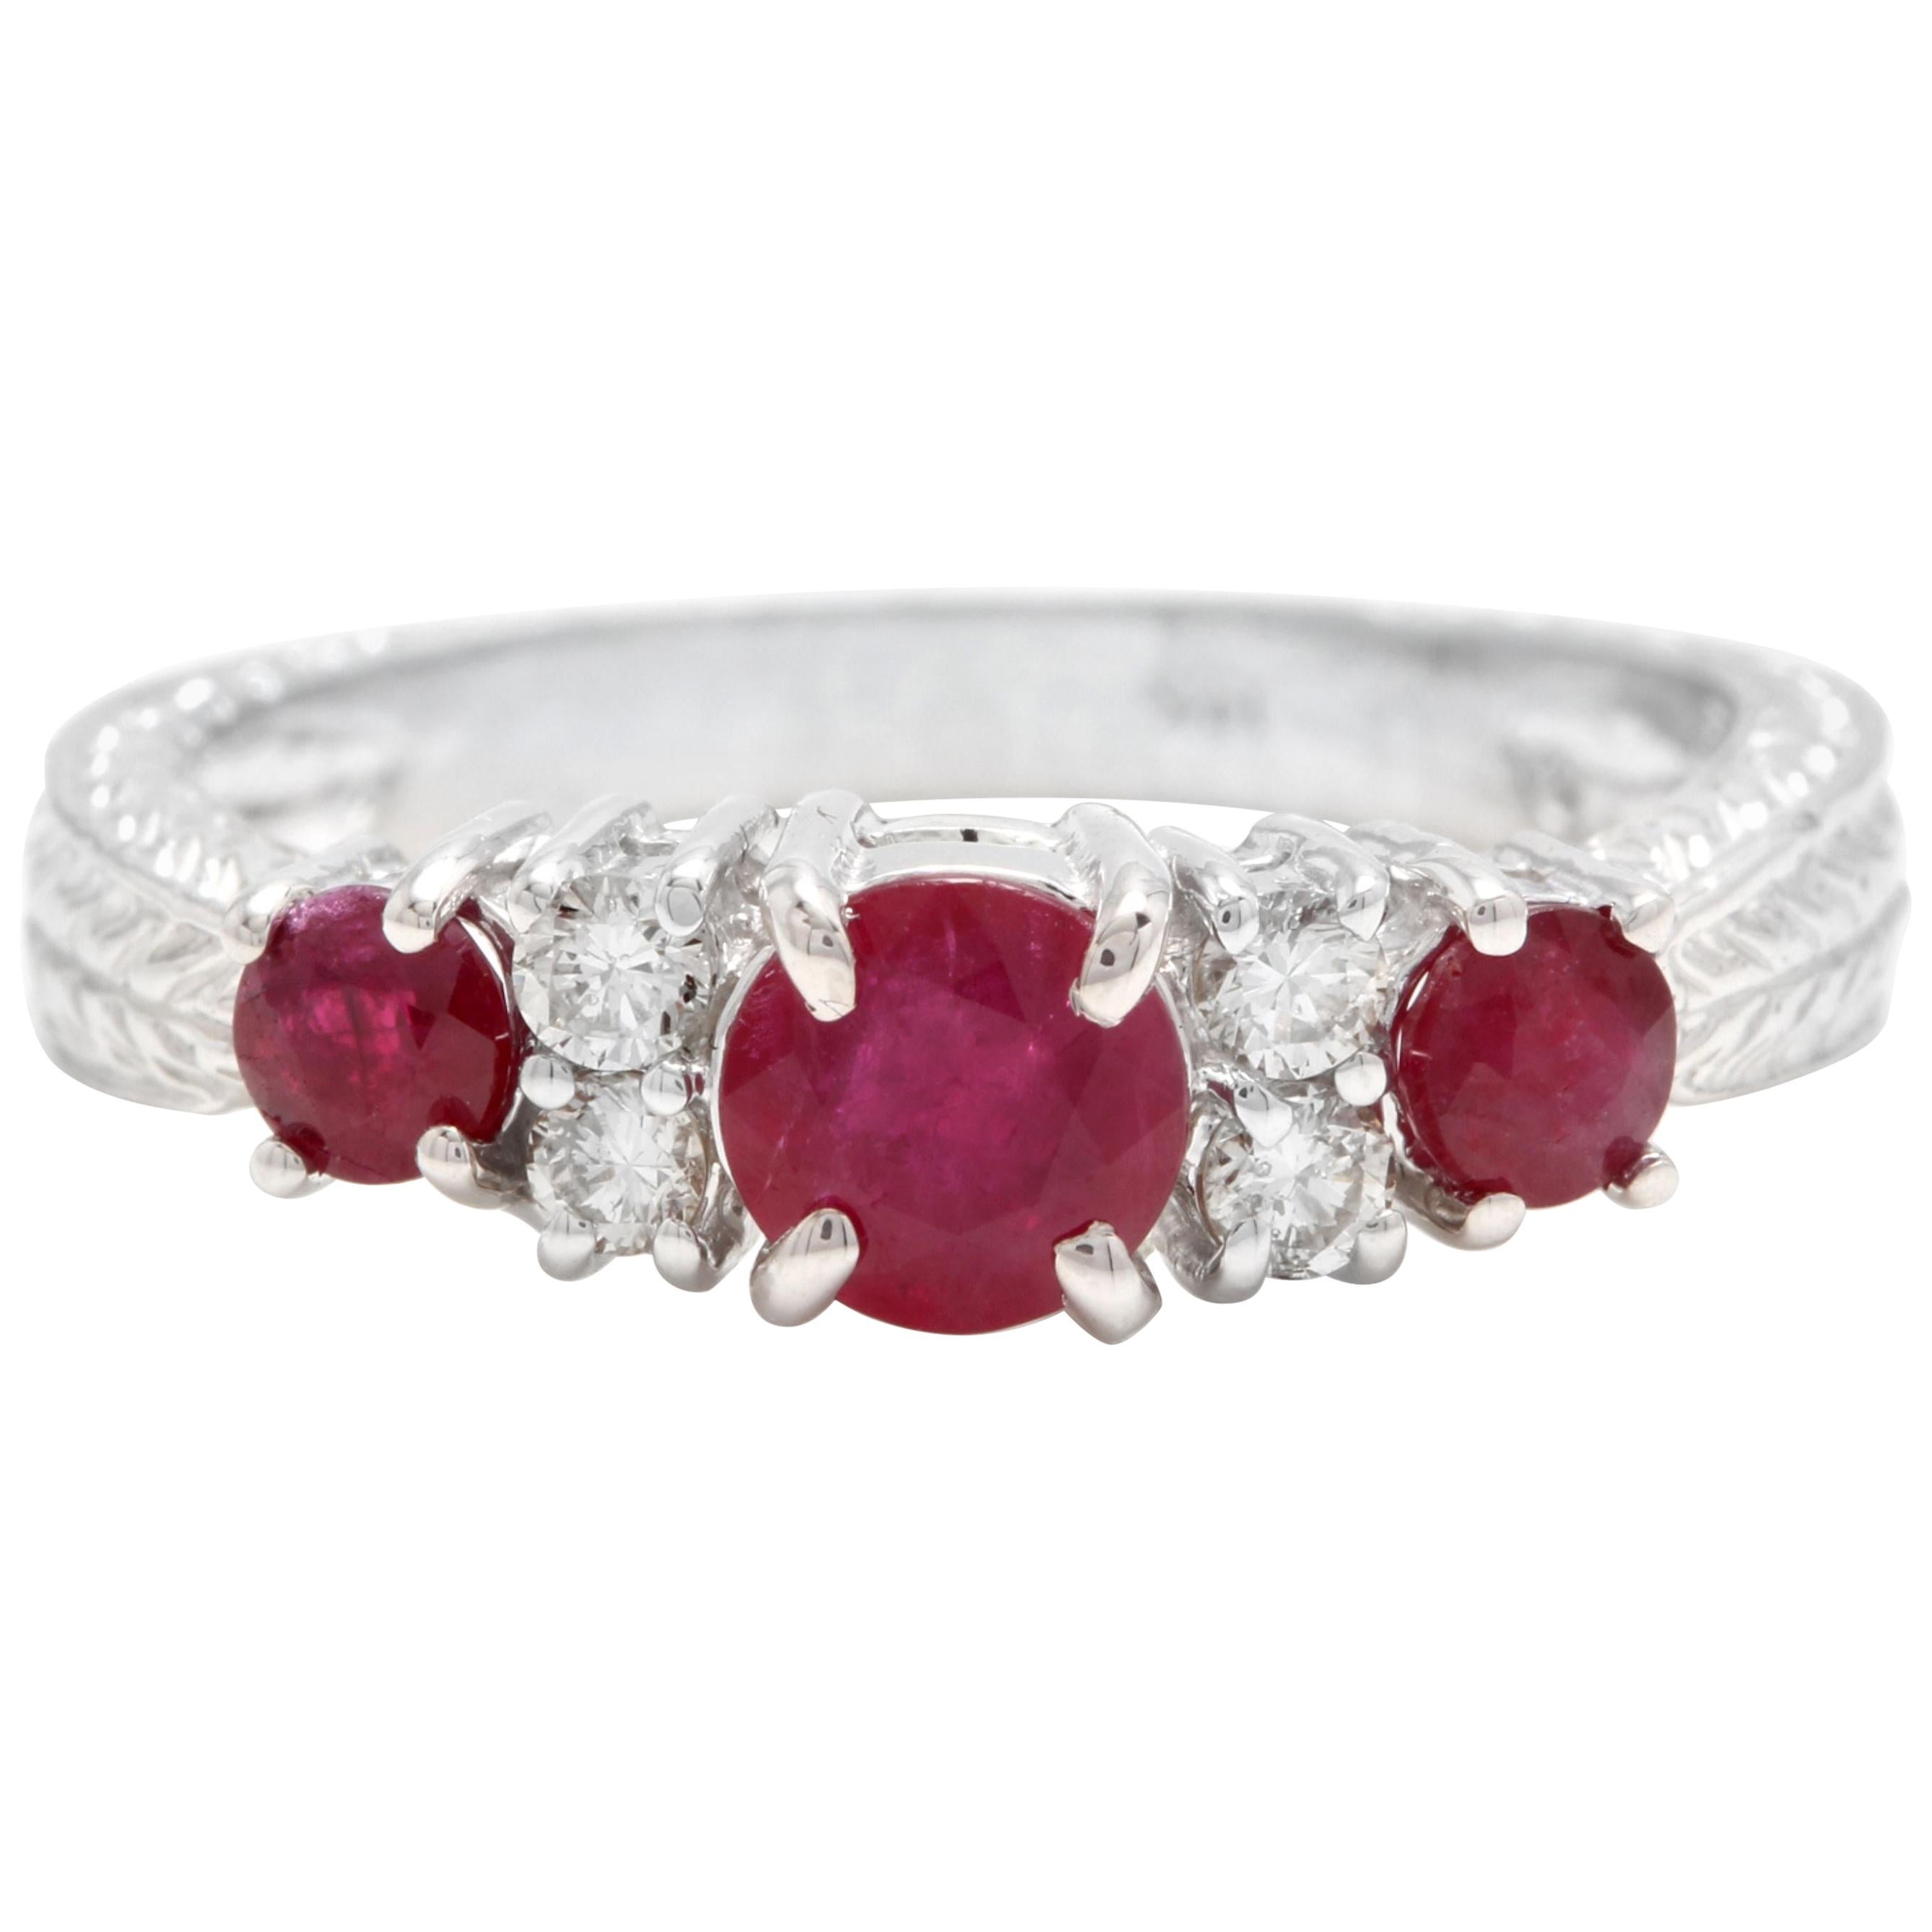 1.70 Ct Impressive Natural Untreated Ruby & Natural Diamond 14K White Gold Ring